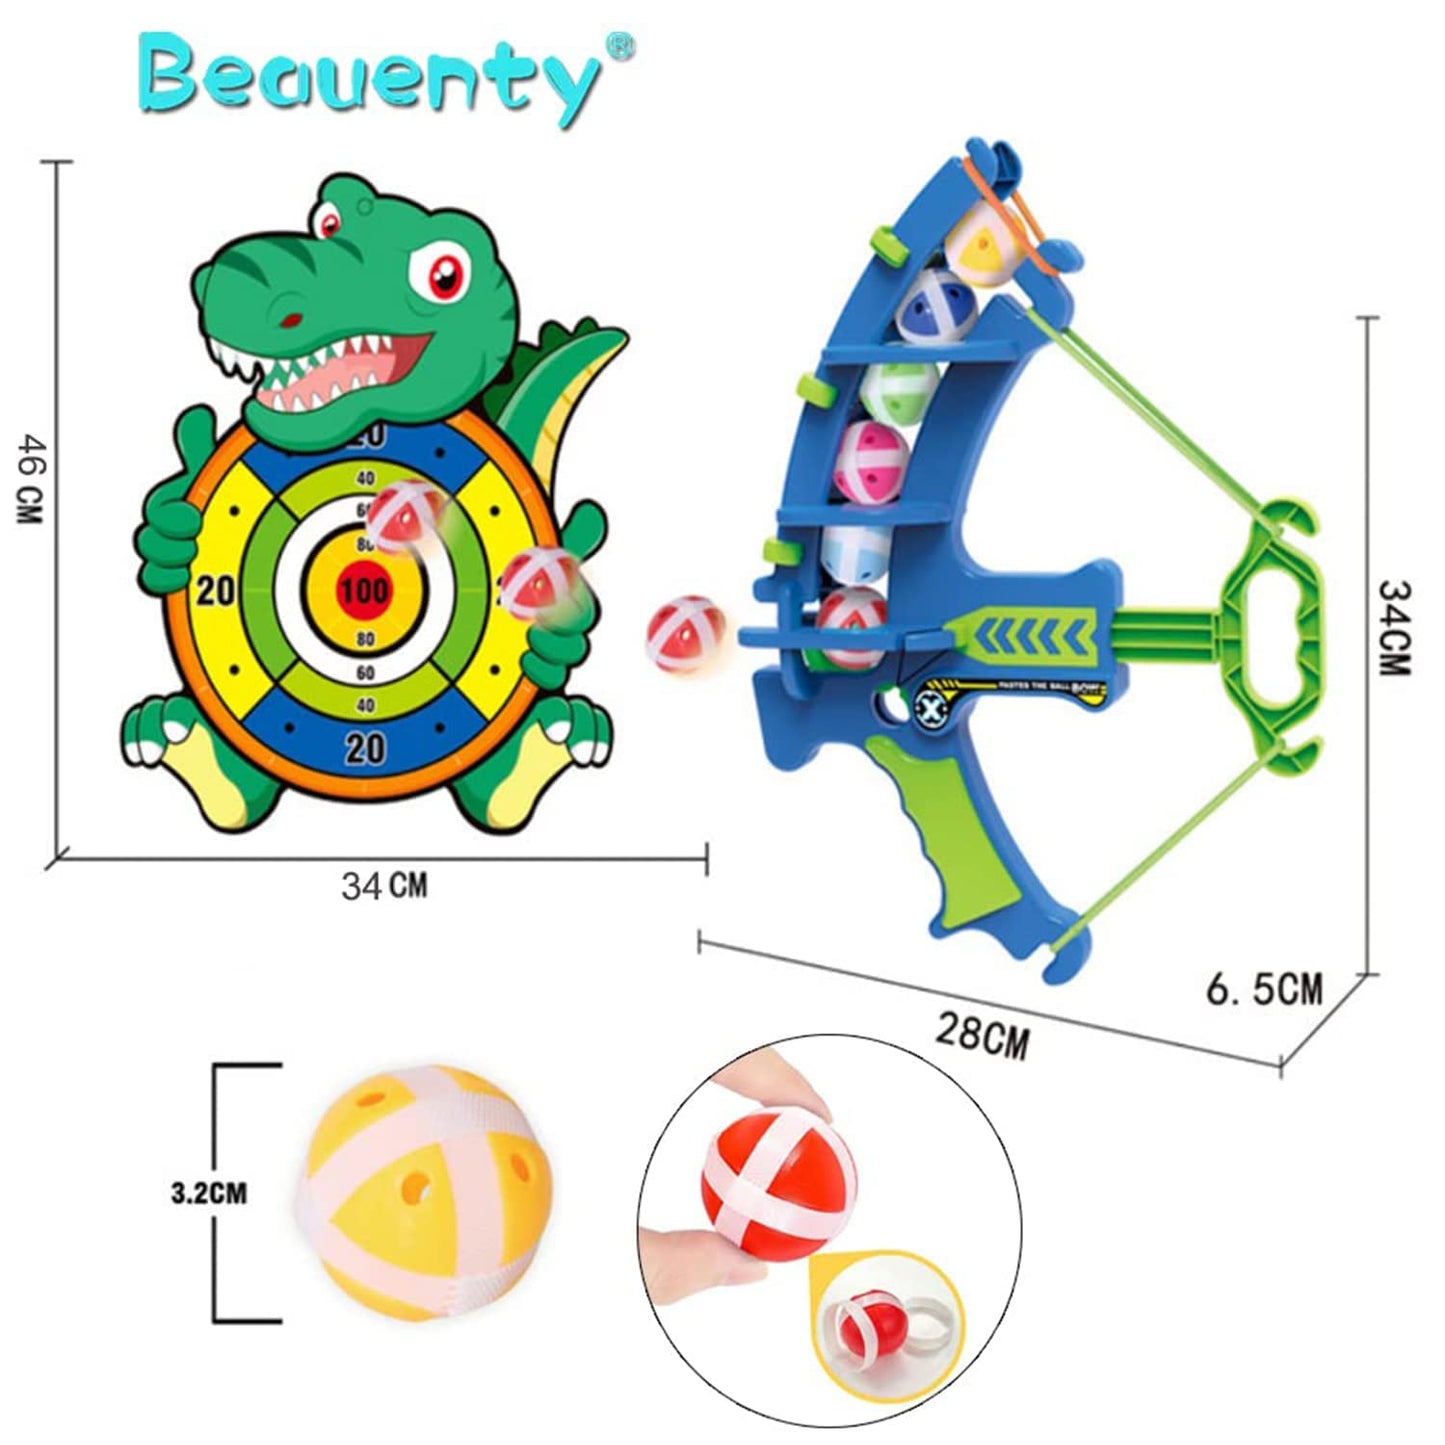 Beauenty Target Shooting Games Kids Toys, Safe Shooting Games Toys, 1 Dinosaur Bow and Arrow with 24 Sticky Balls for 4 5 6 7 8 9 Years Old Boys Girls Toy Set Gift (Dinosaur Shooting Games)